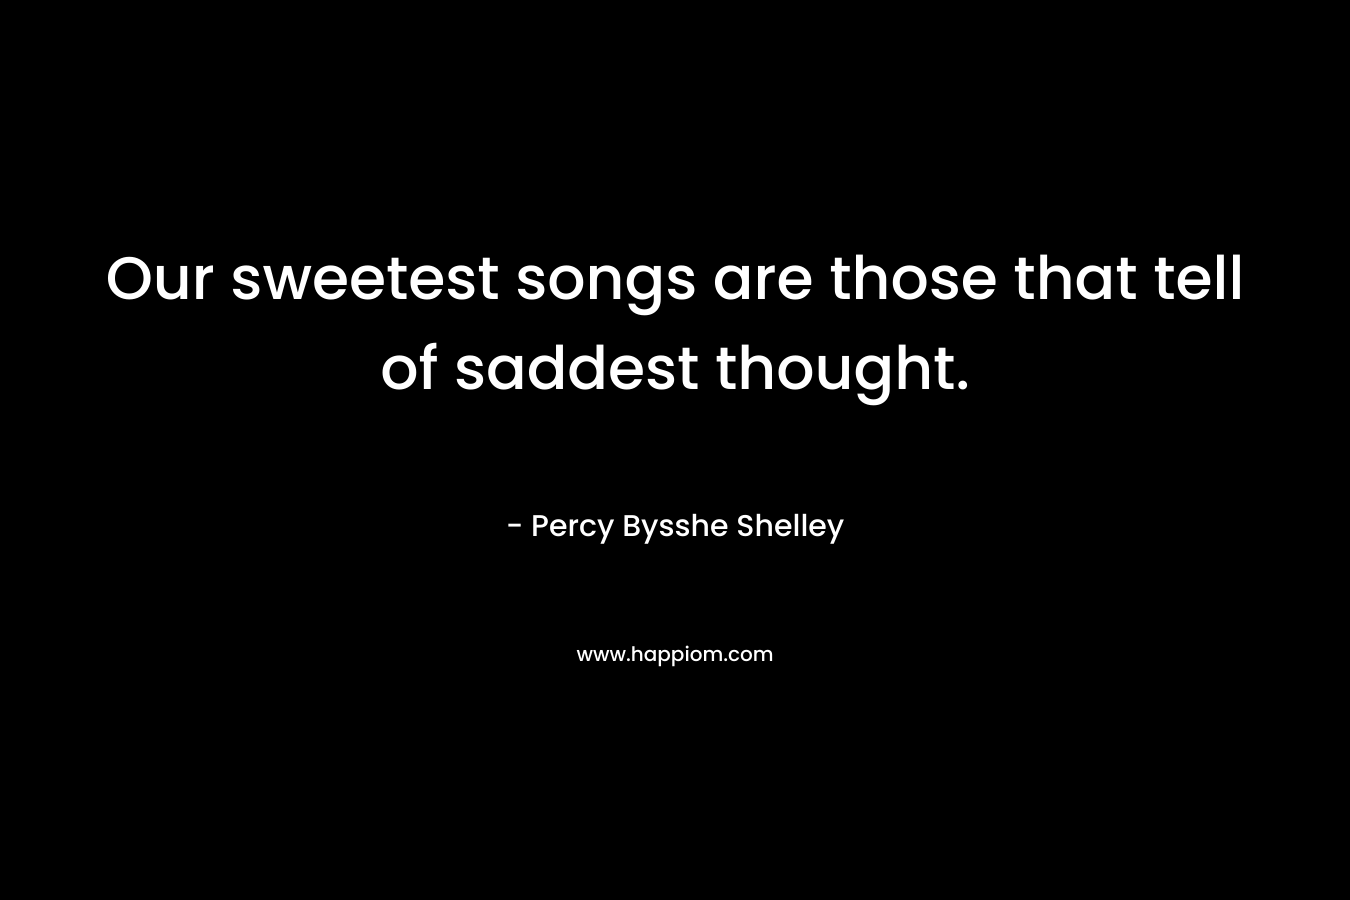 Our sweetest songs are those that tell of saddest thought.